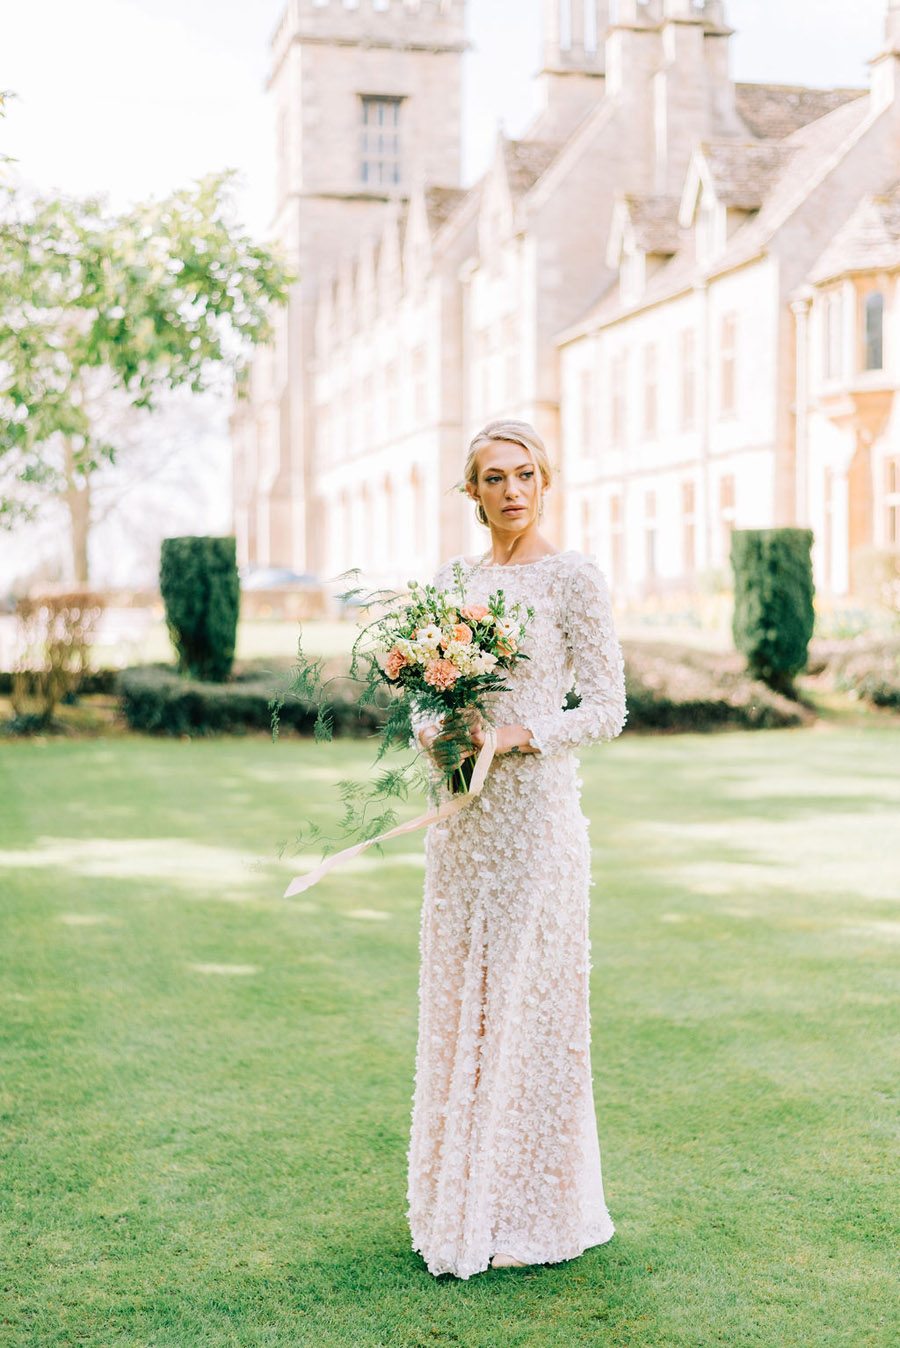 coral and neutral colour palette for a stunning wedding look with Corky and Prince, image credit Rachel Jane Photography (4)